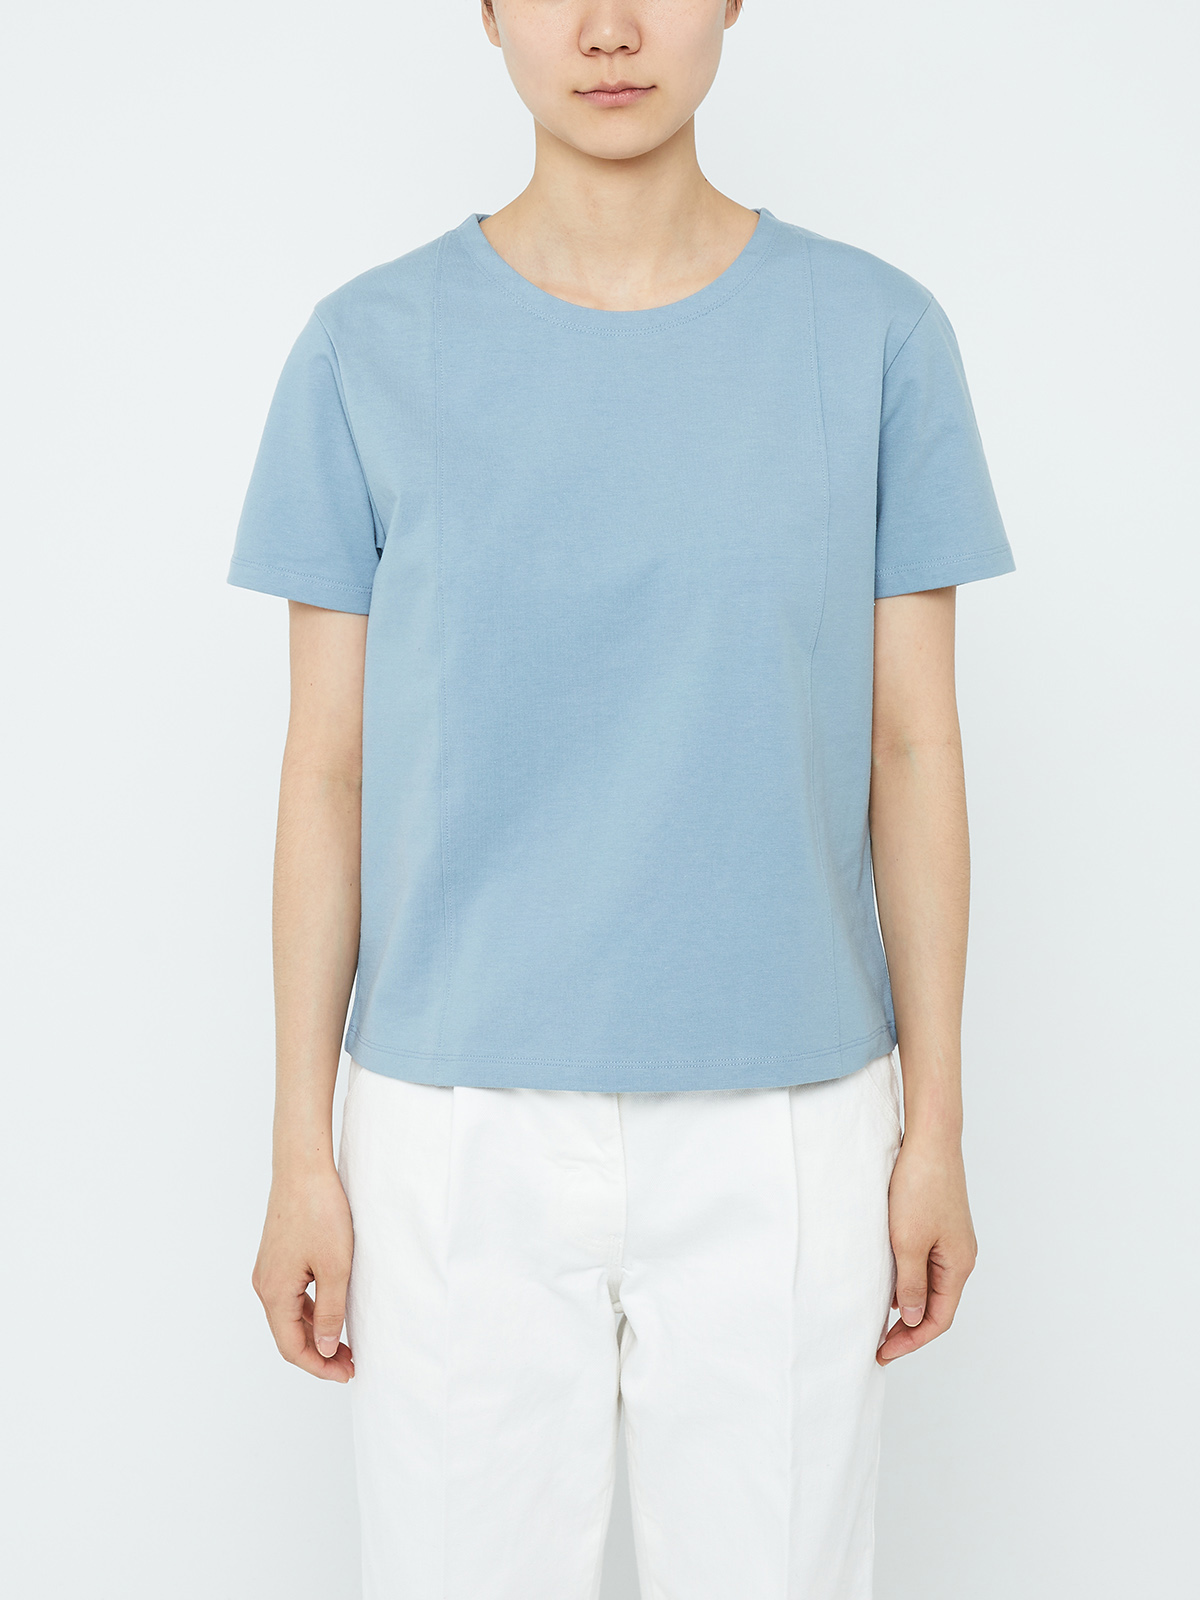 TWO PIN T-SHIRT (BABY BLUE)